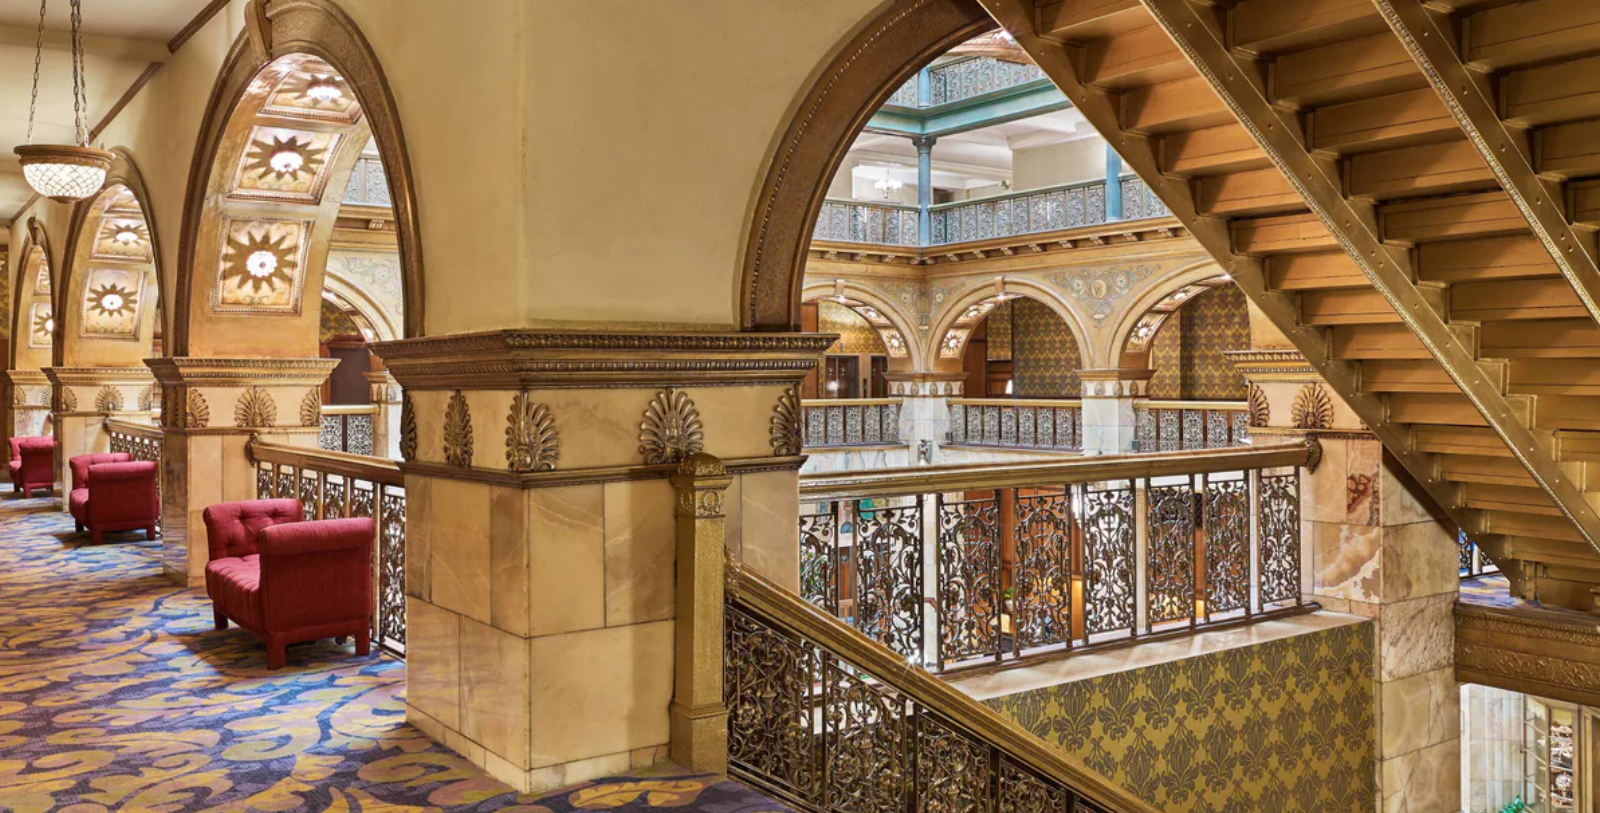 Discover why The Brown Palace Hotel and Spa is known as the “Grande Dame of Denver,” from its stately Italian Renaissance Revival architecture to its distinguished tradition of offering gracious hospitality.